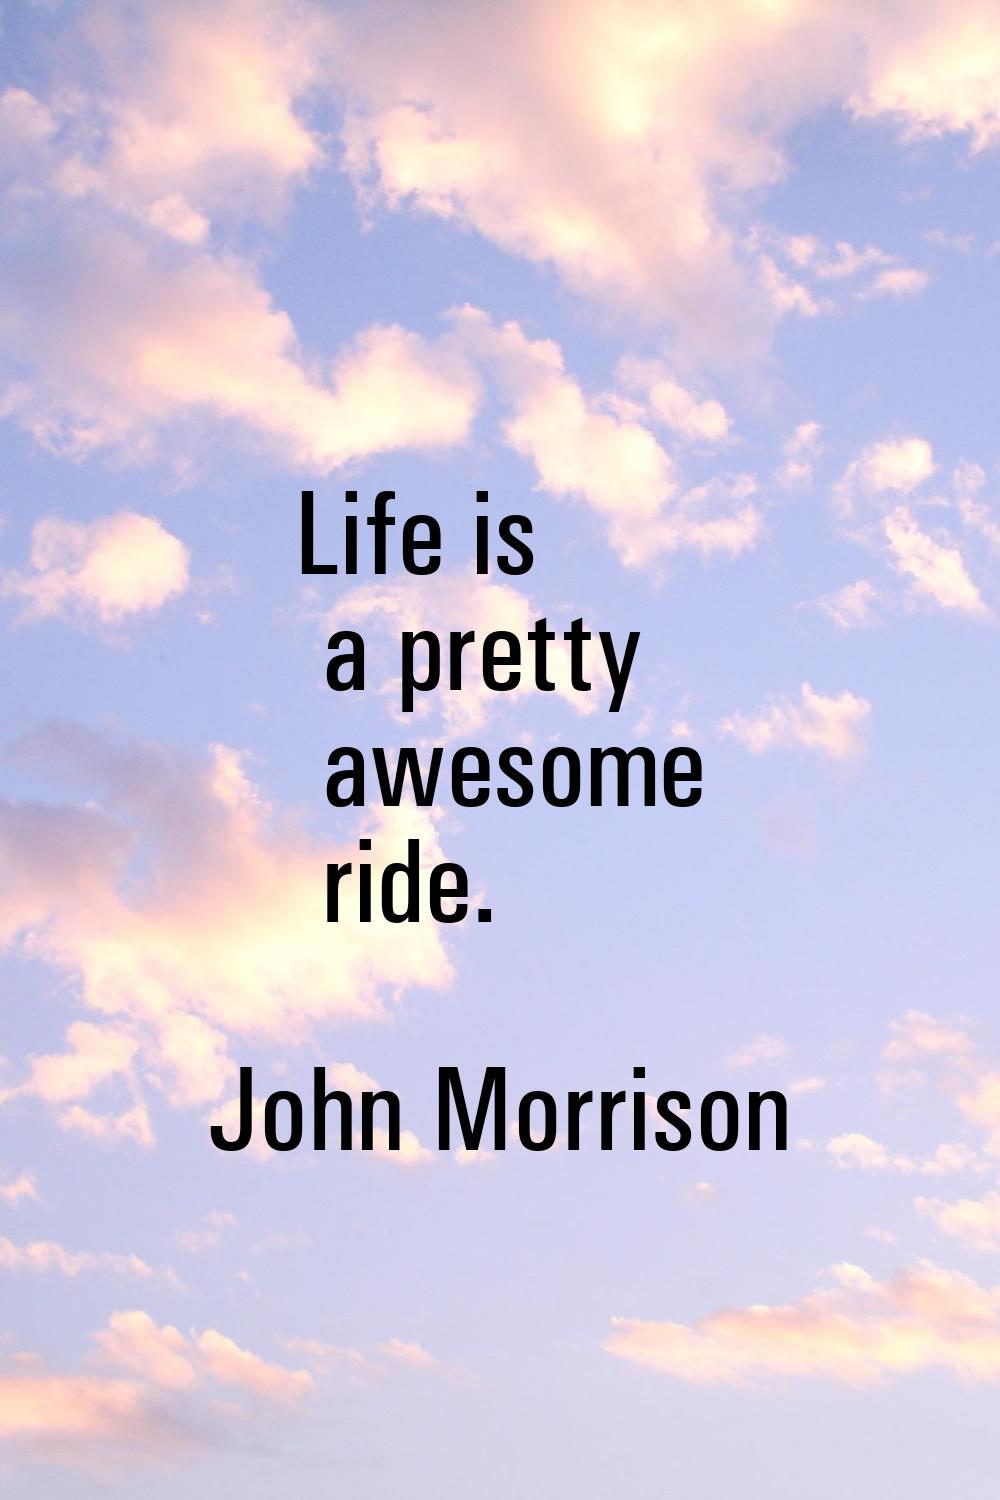 Life is a pretty awesome ride.